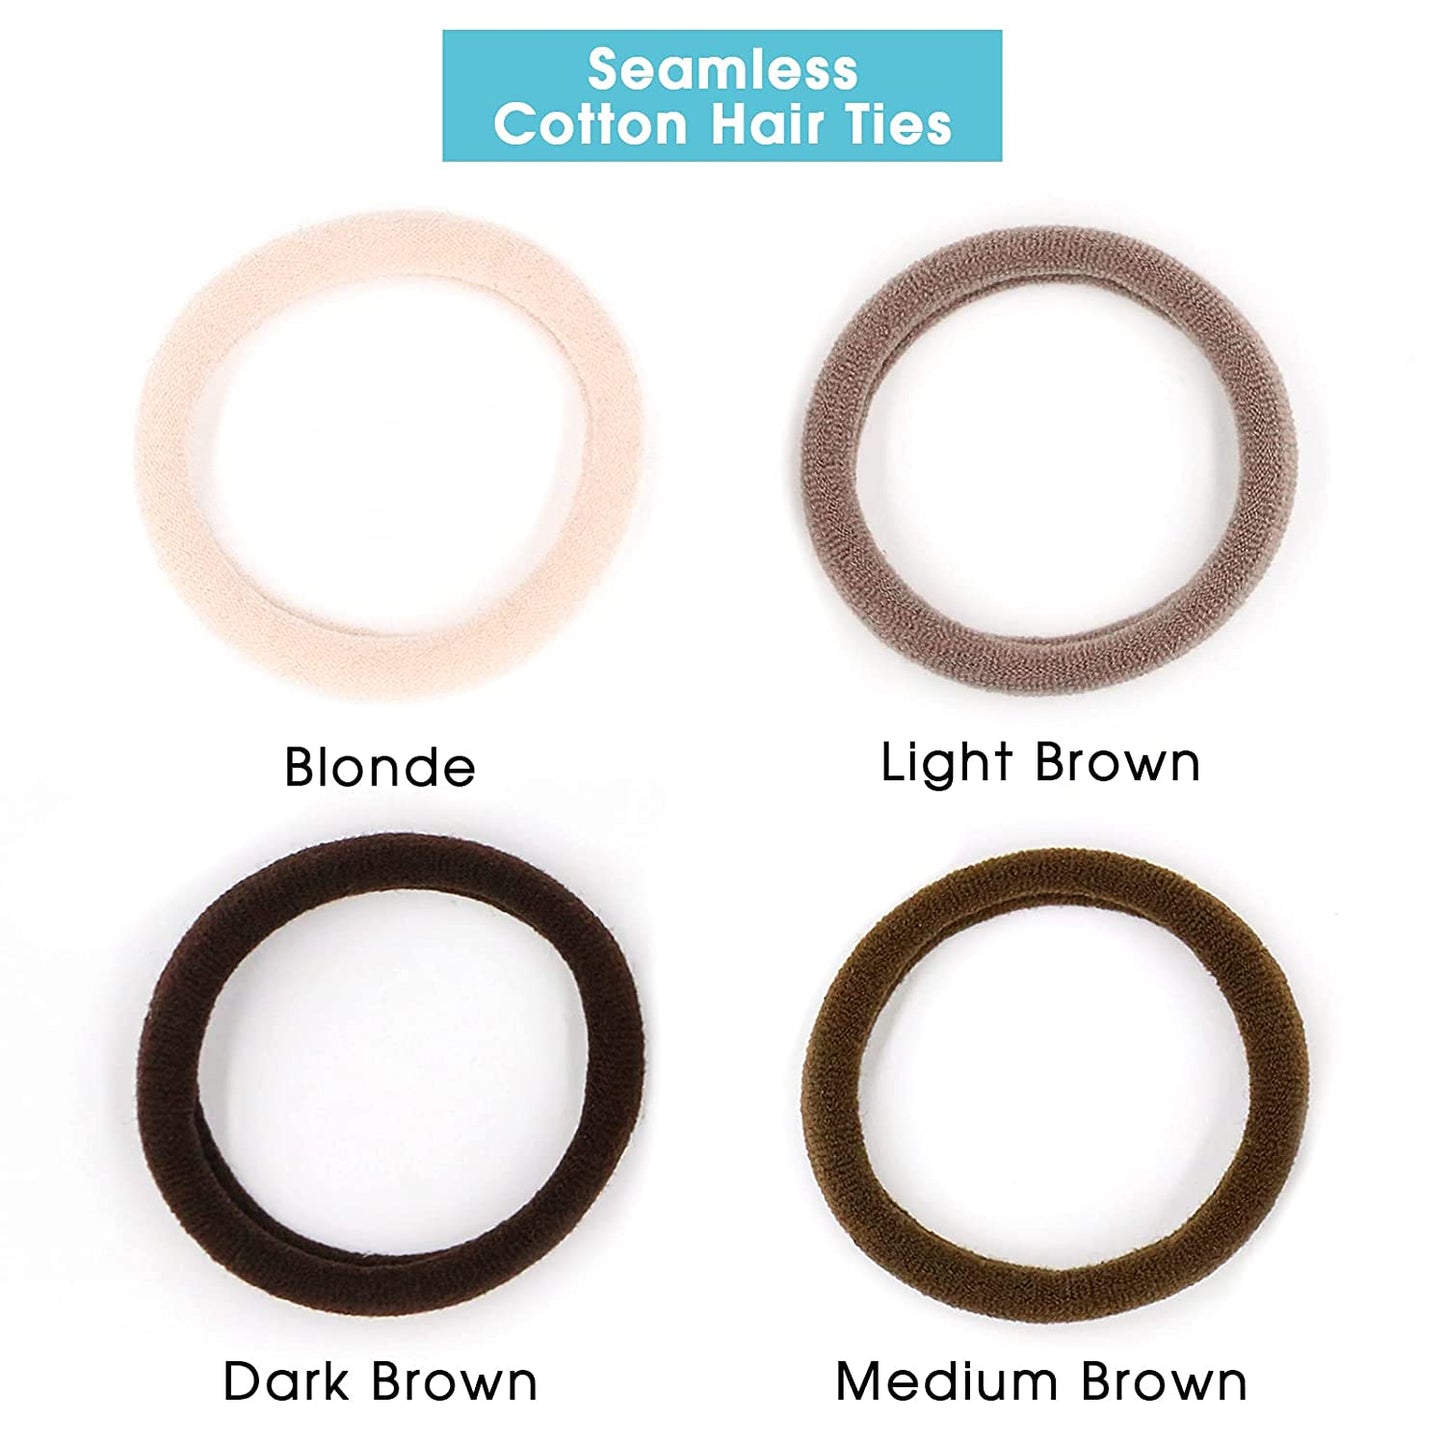 Soft & Stretch Cotton Hair Ties Large Hair Bands Nylon Fabric Ponytail Holder for Thick Heavy Curly Hair, No Slip No Damage Seamless Scrunchies Headbands  (Espresso)